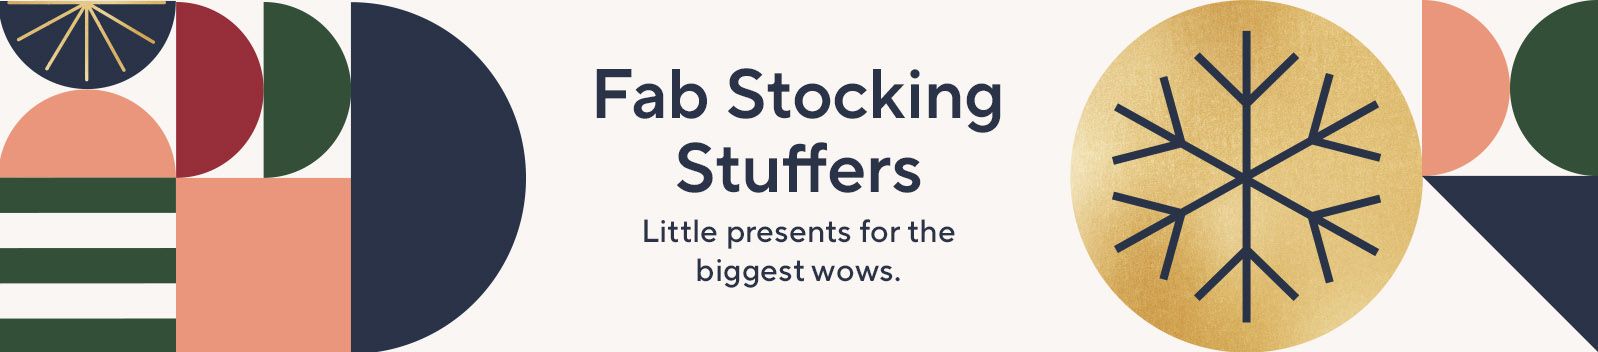 Fab Stocking Stuffers - Little presents for the biggest wows.